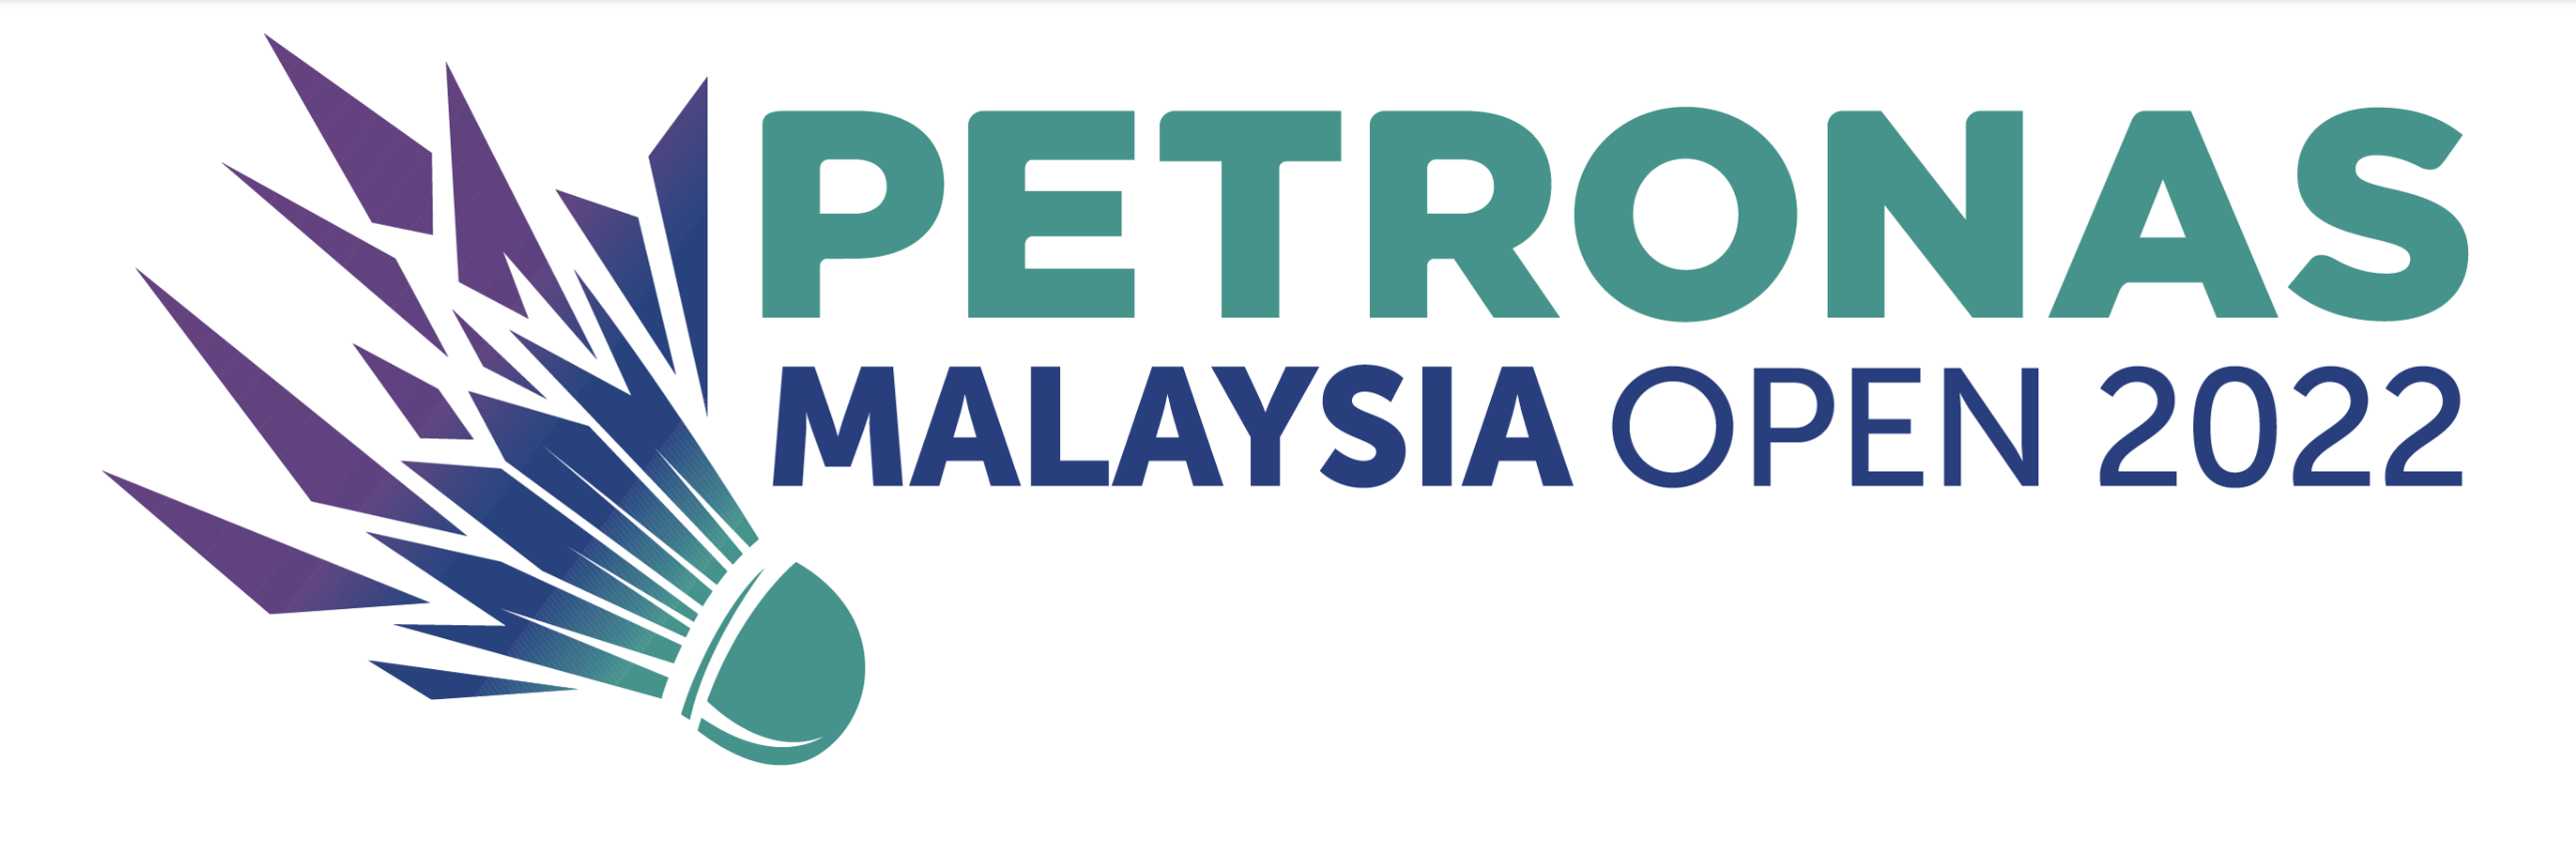 PETRONAS MALAYSIA OPEN 2022 tickets go on sale May 26th!  Sports247